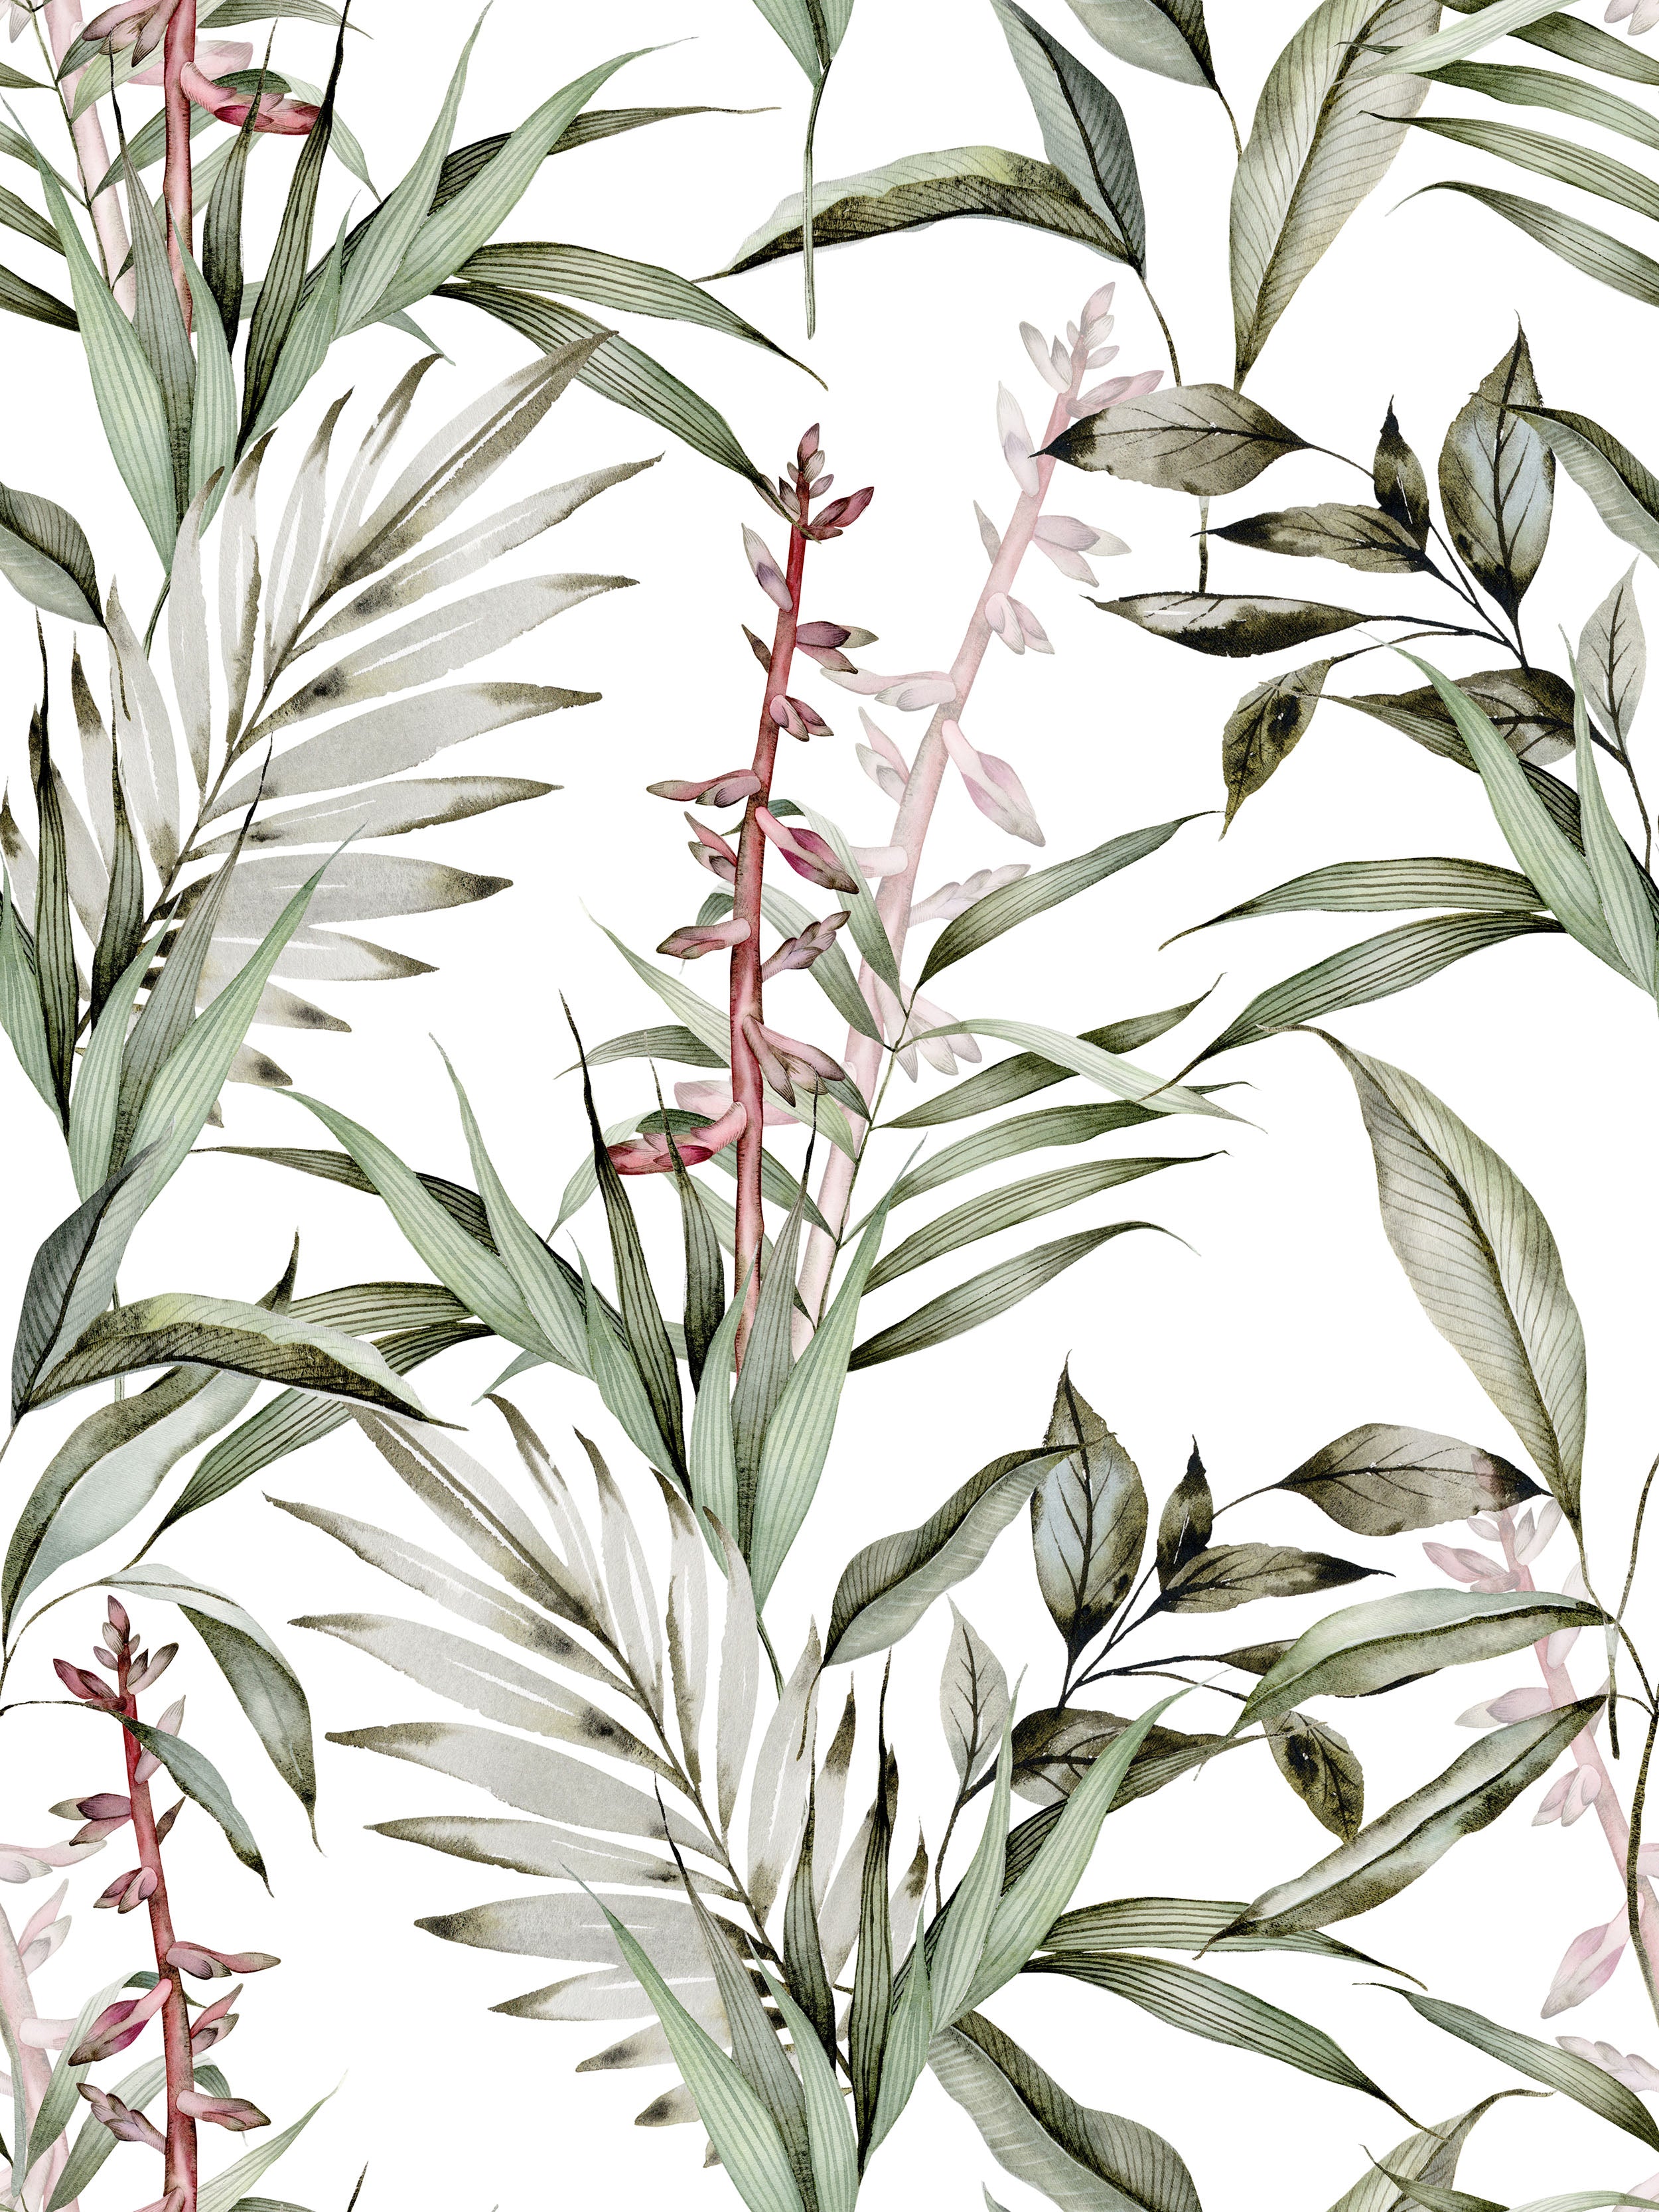 A close-up view of tropical branches wallpaper showcasing an intricate pattern of green leaves and pinkish-red flowers on a light background. The detailed design and natural colors create a lush and refreshing look, perfect for adding a touch of nature to any room.